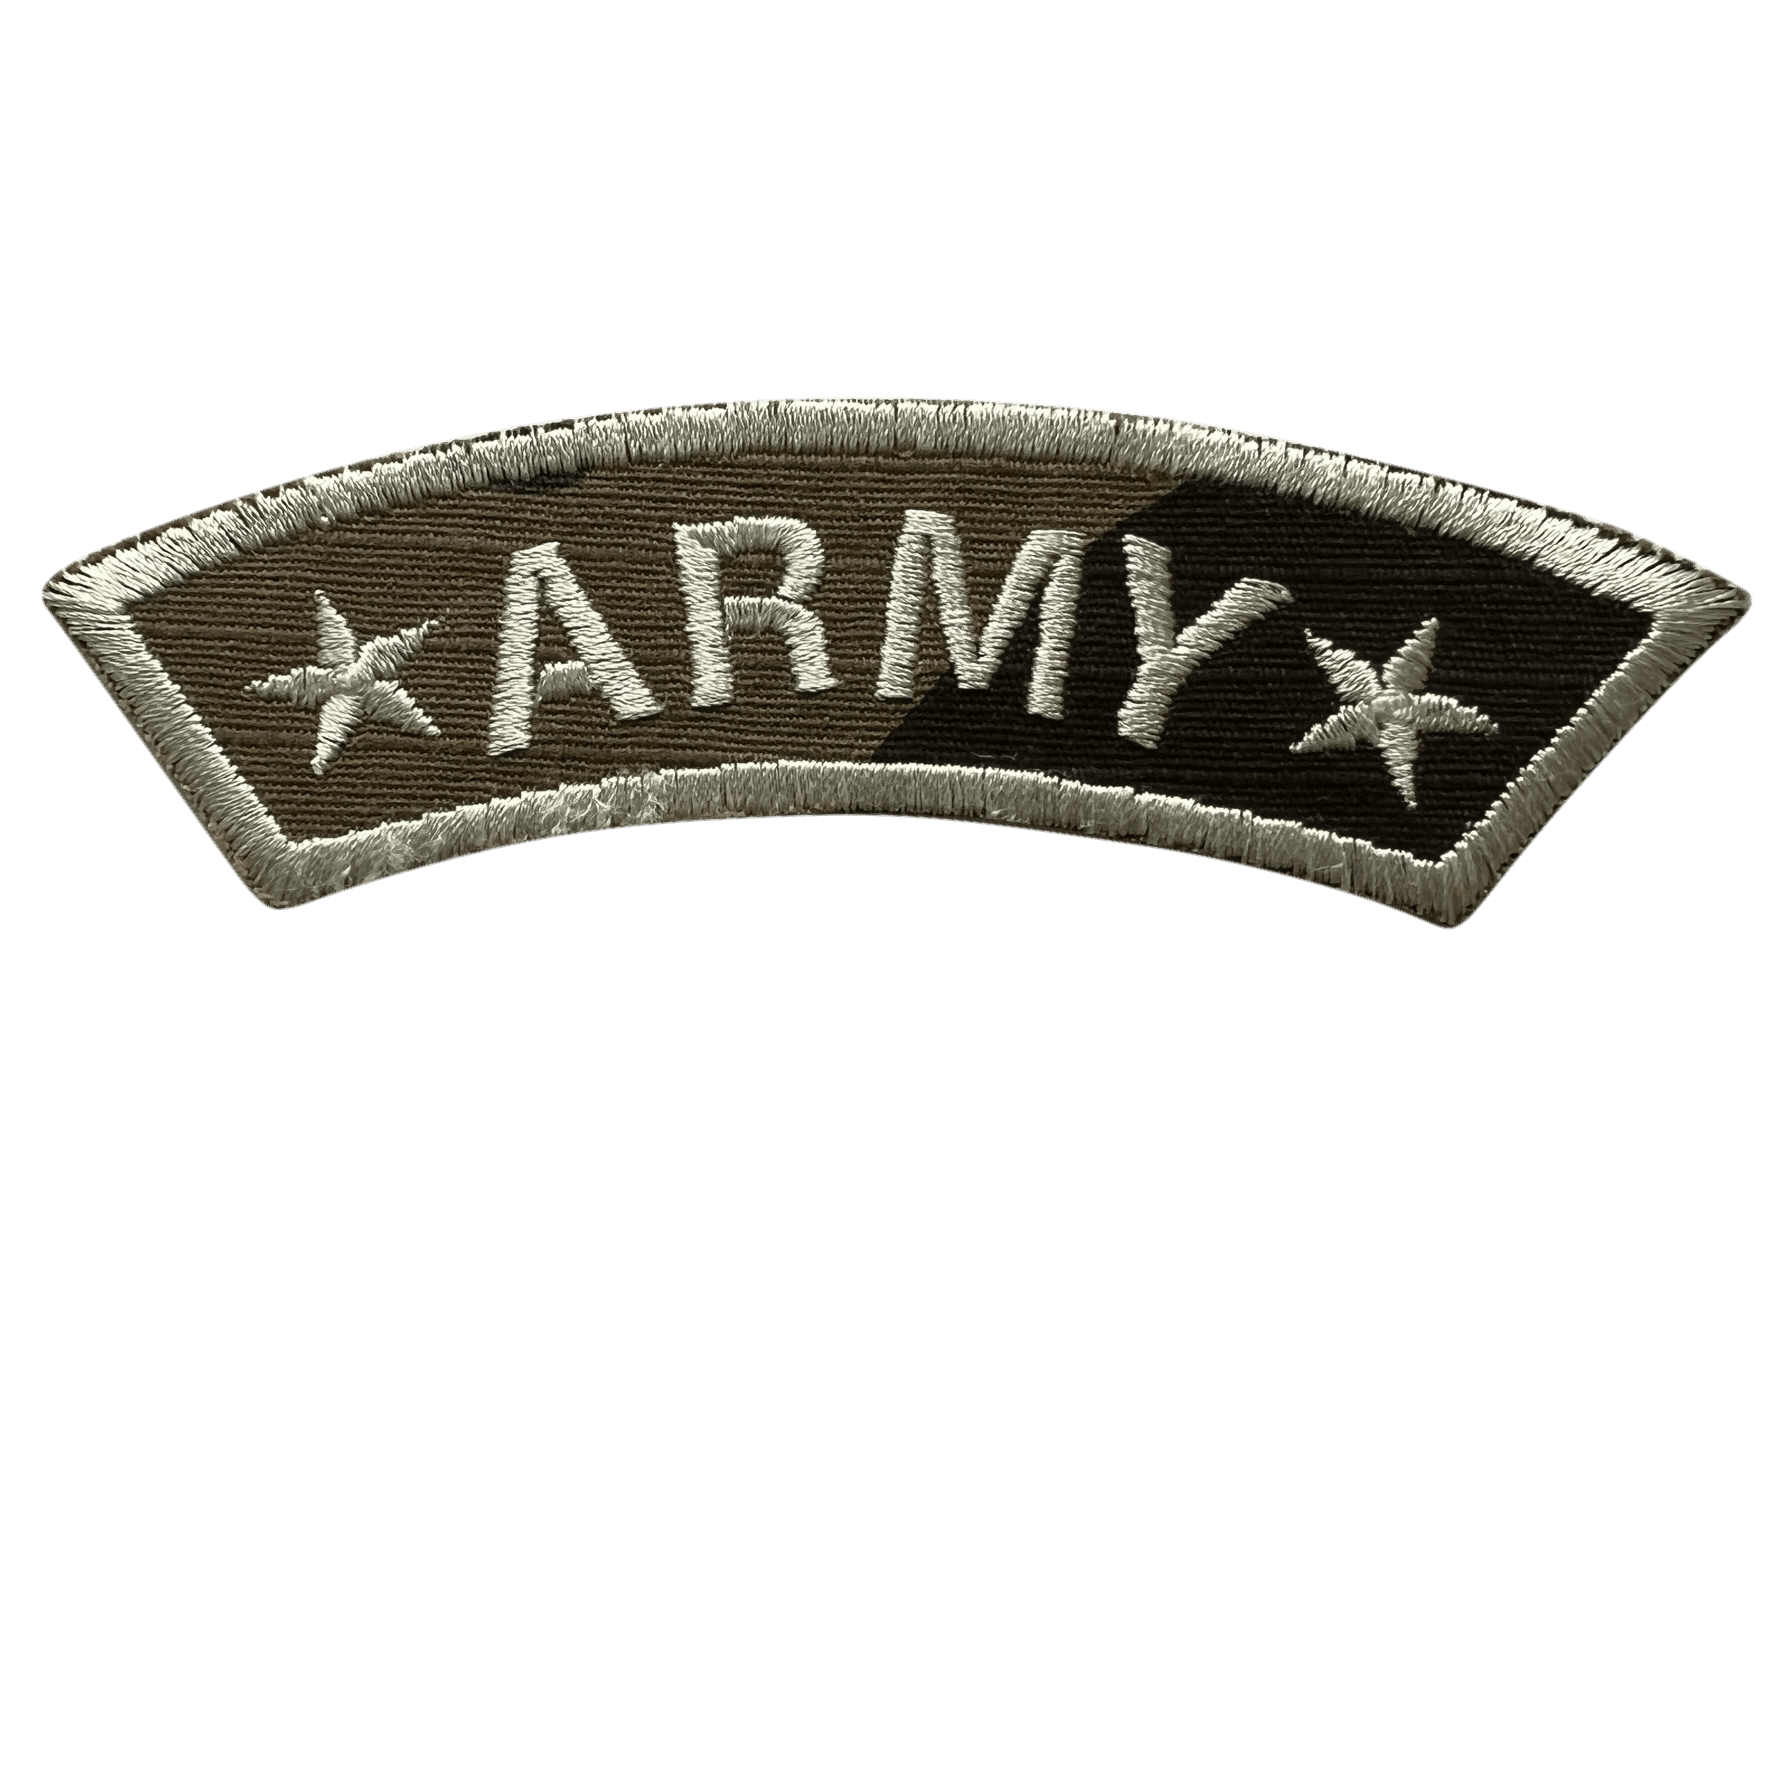 ARMY Patch Iron Sew On US Military Uniform Fancy Dress Costume Embroidered Badge